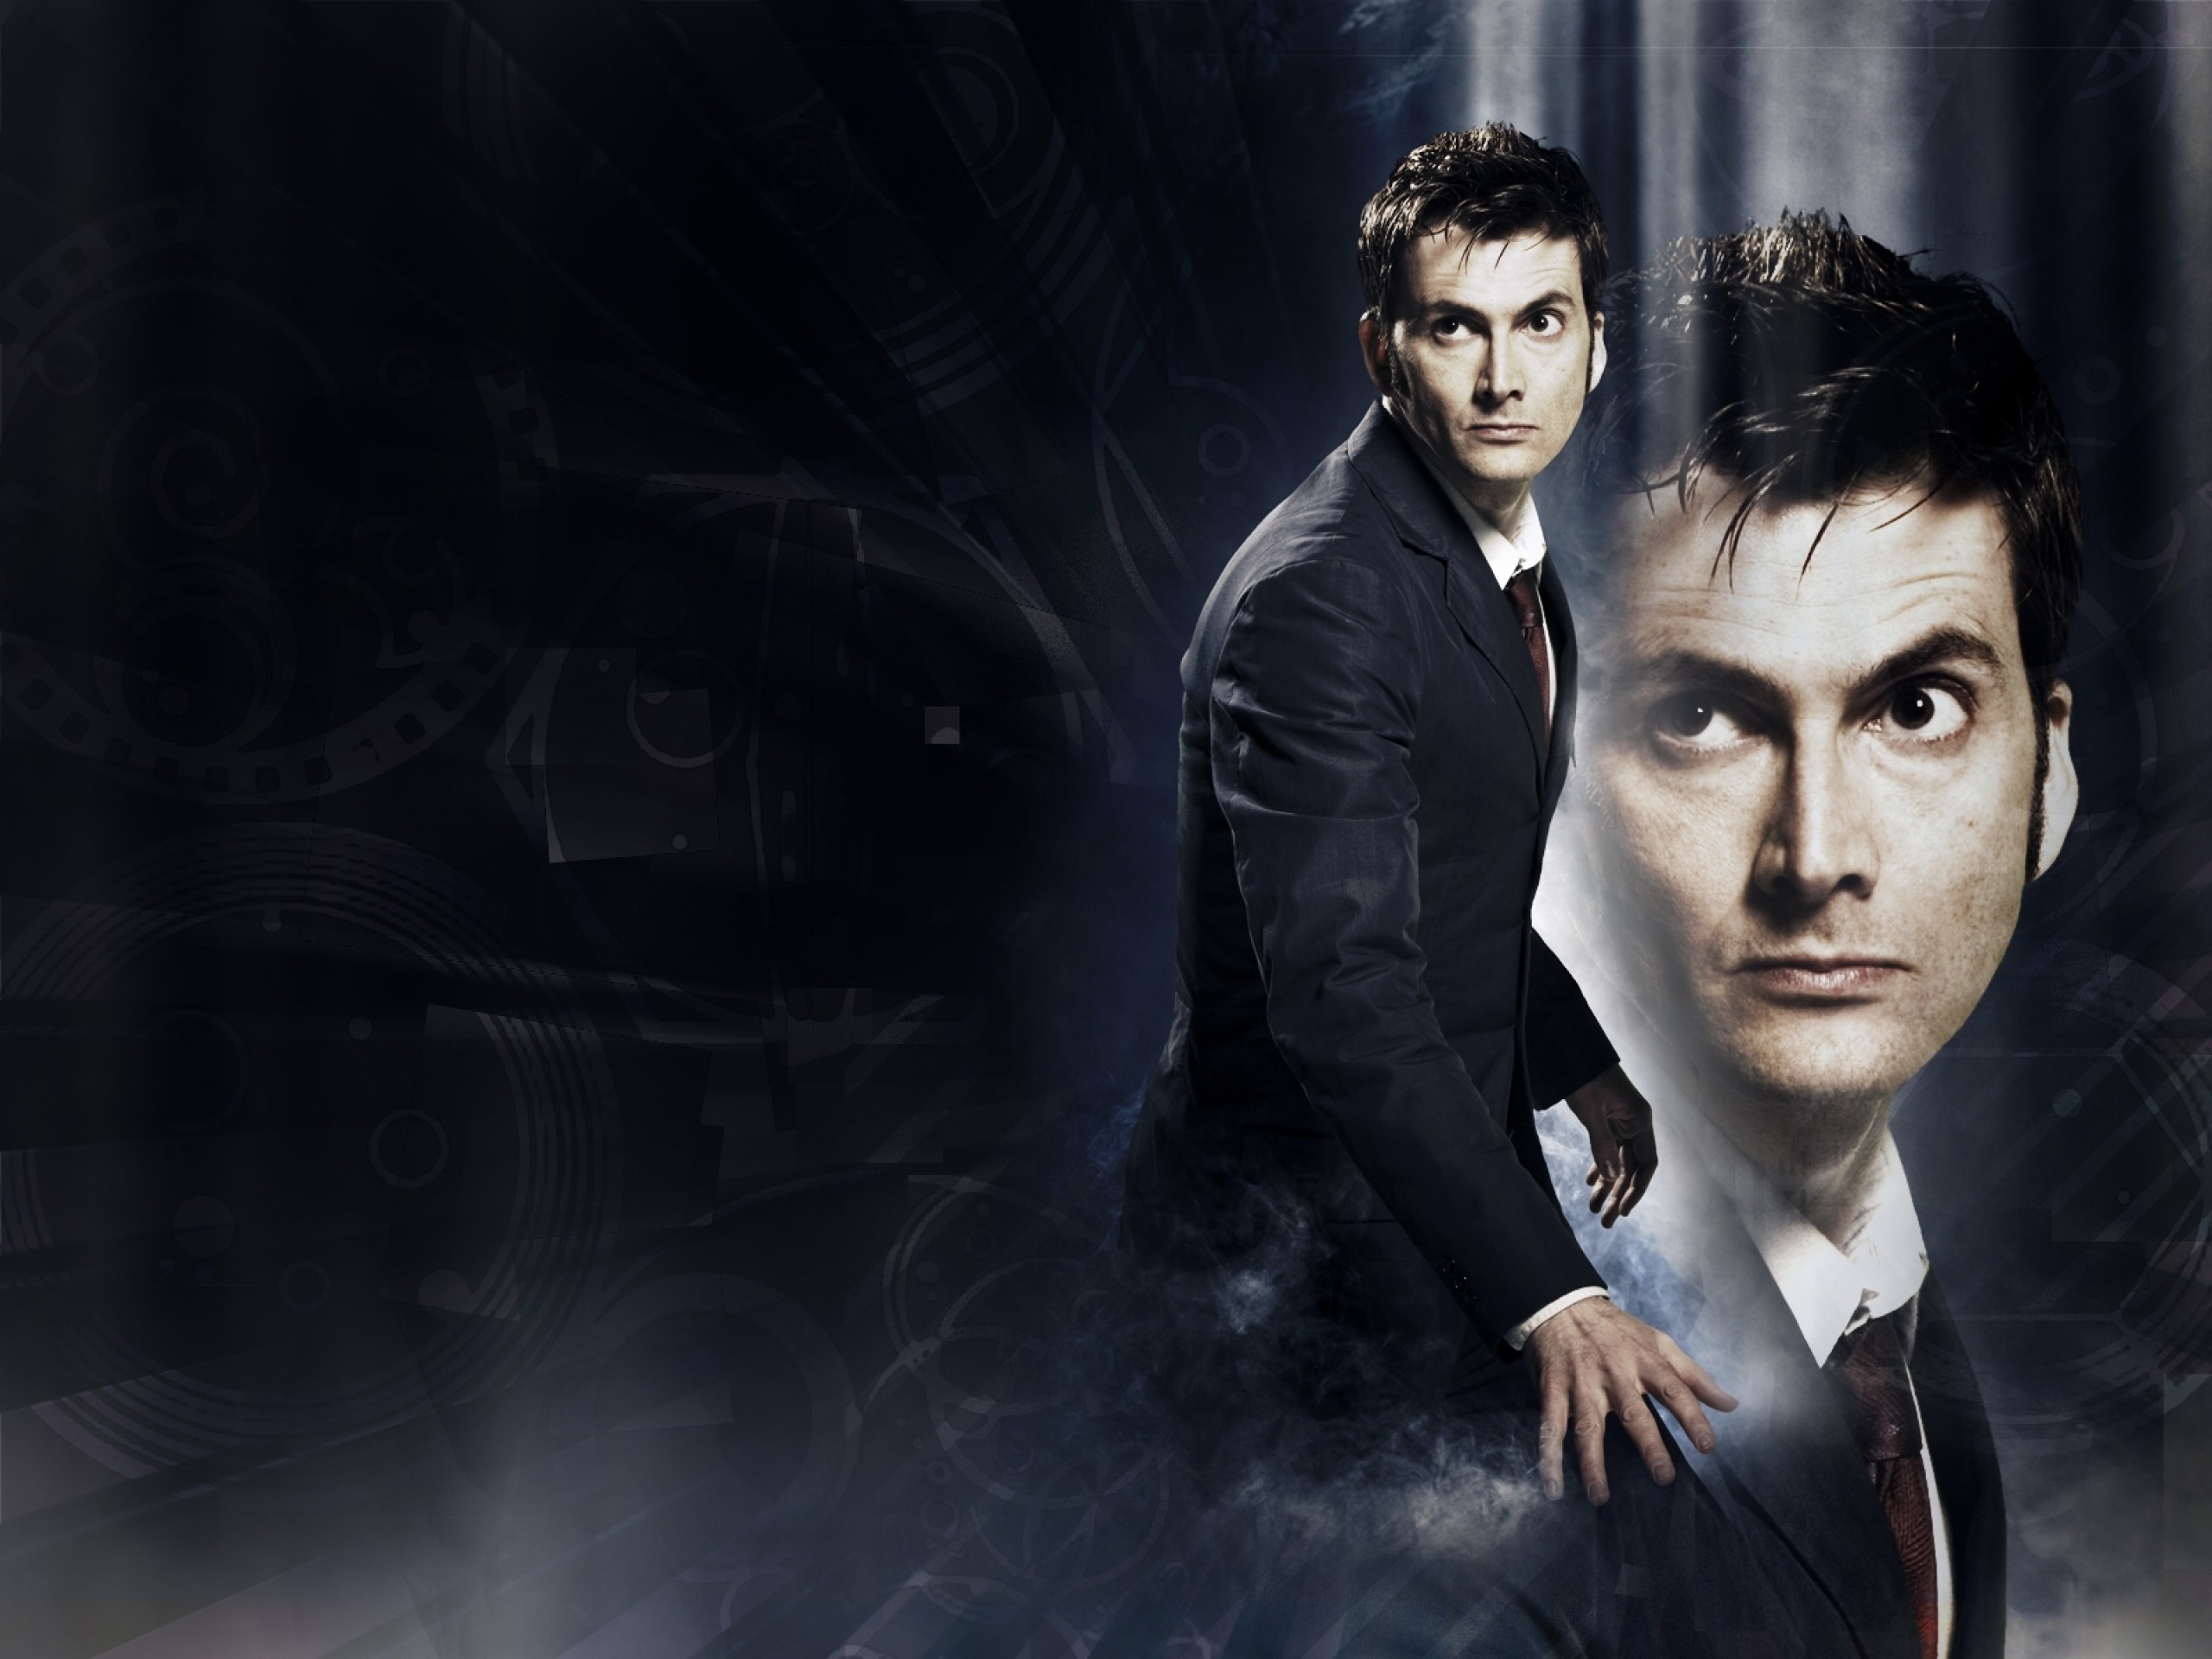 General 2560x1920 Doctor Who The Doctor TARDIS David Tennant Tenth Doctor science fiction TV series